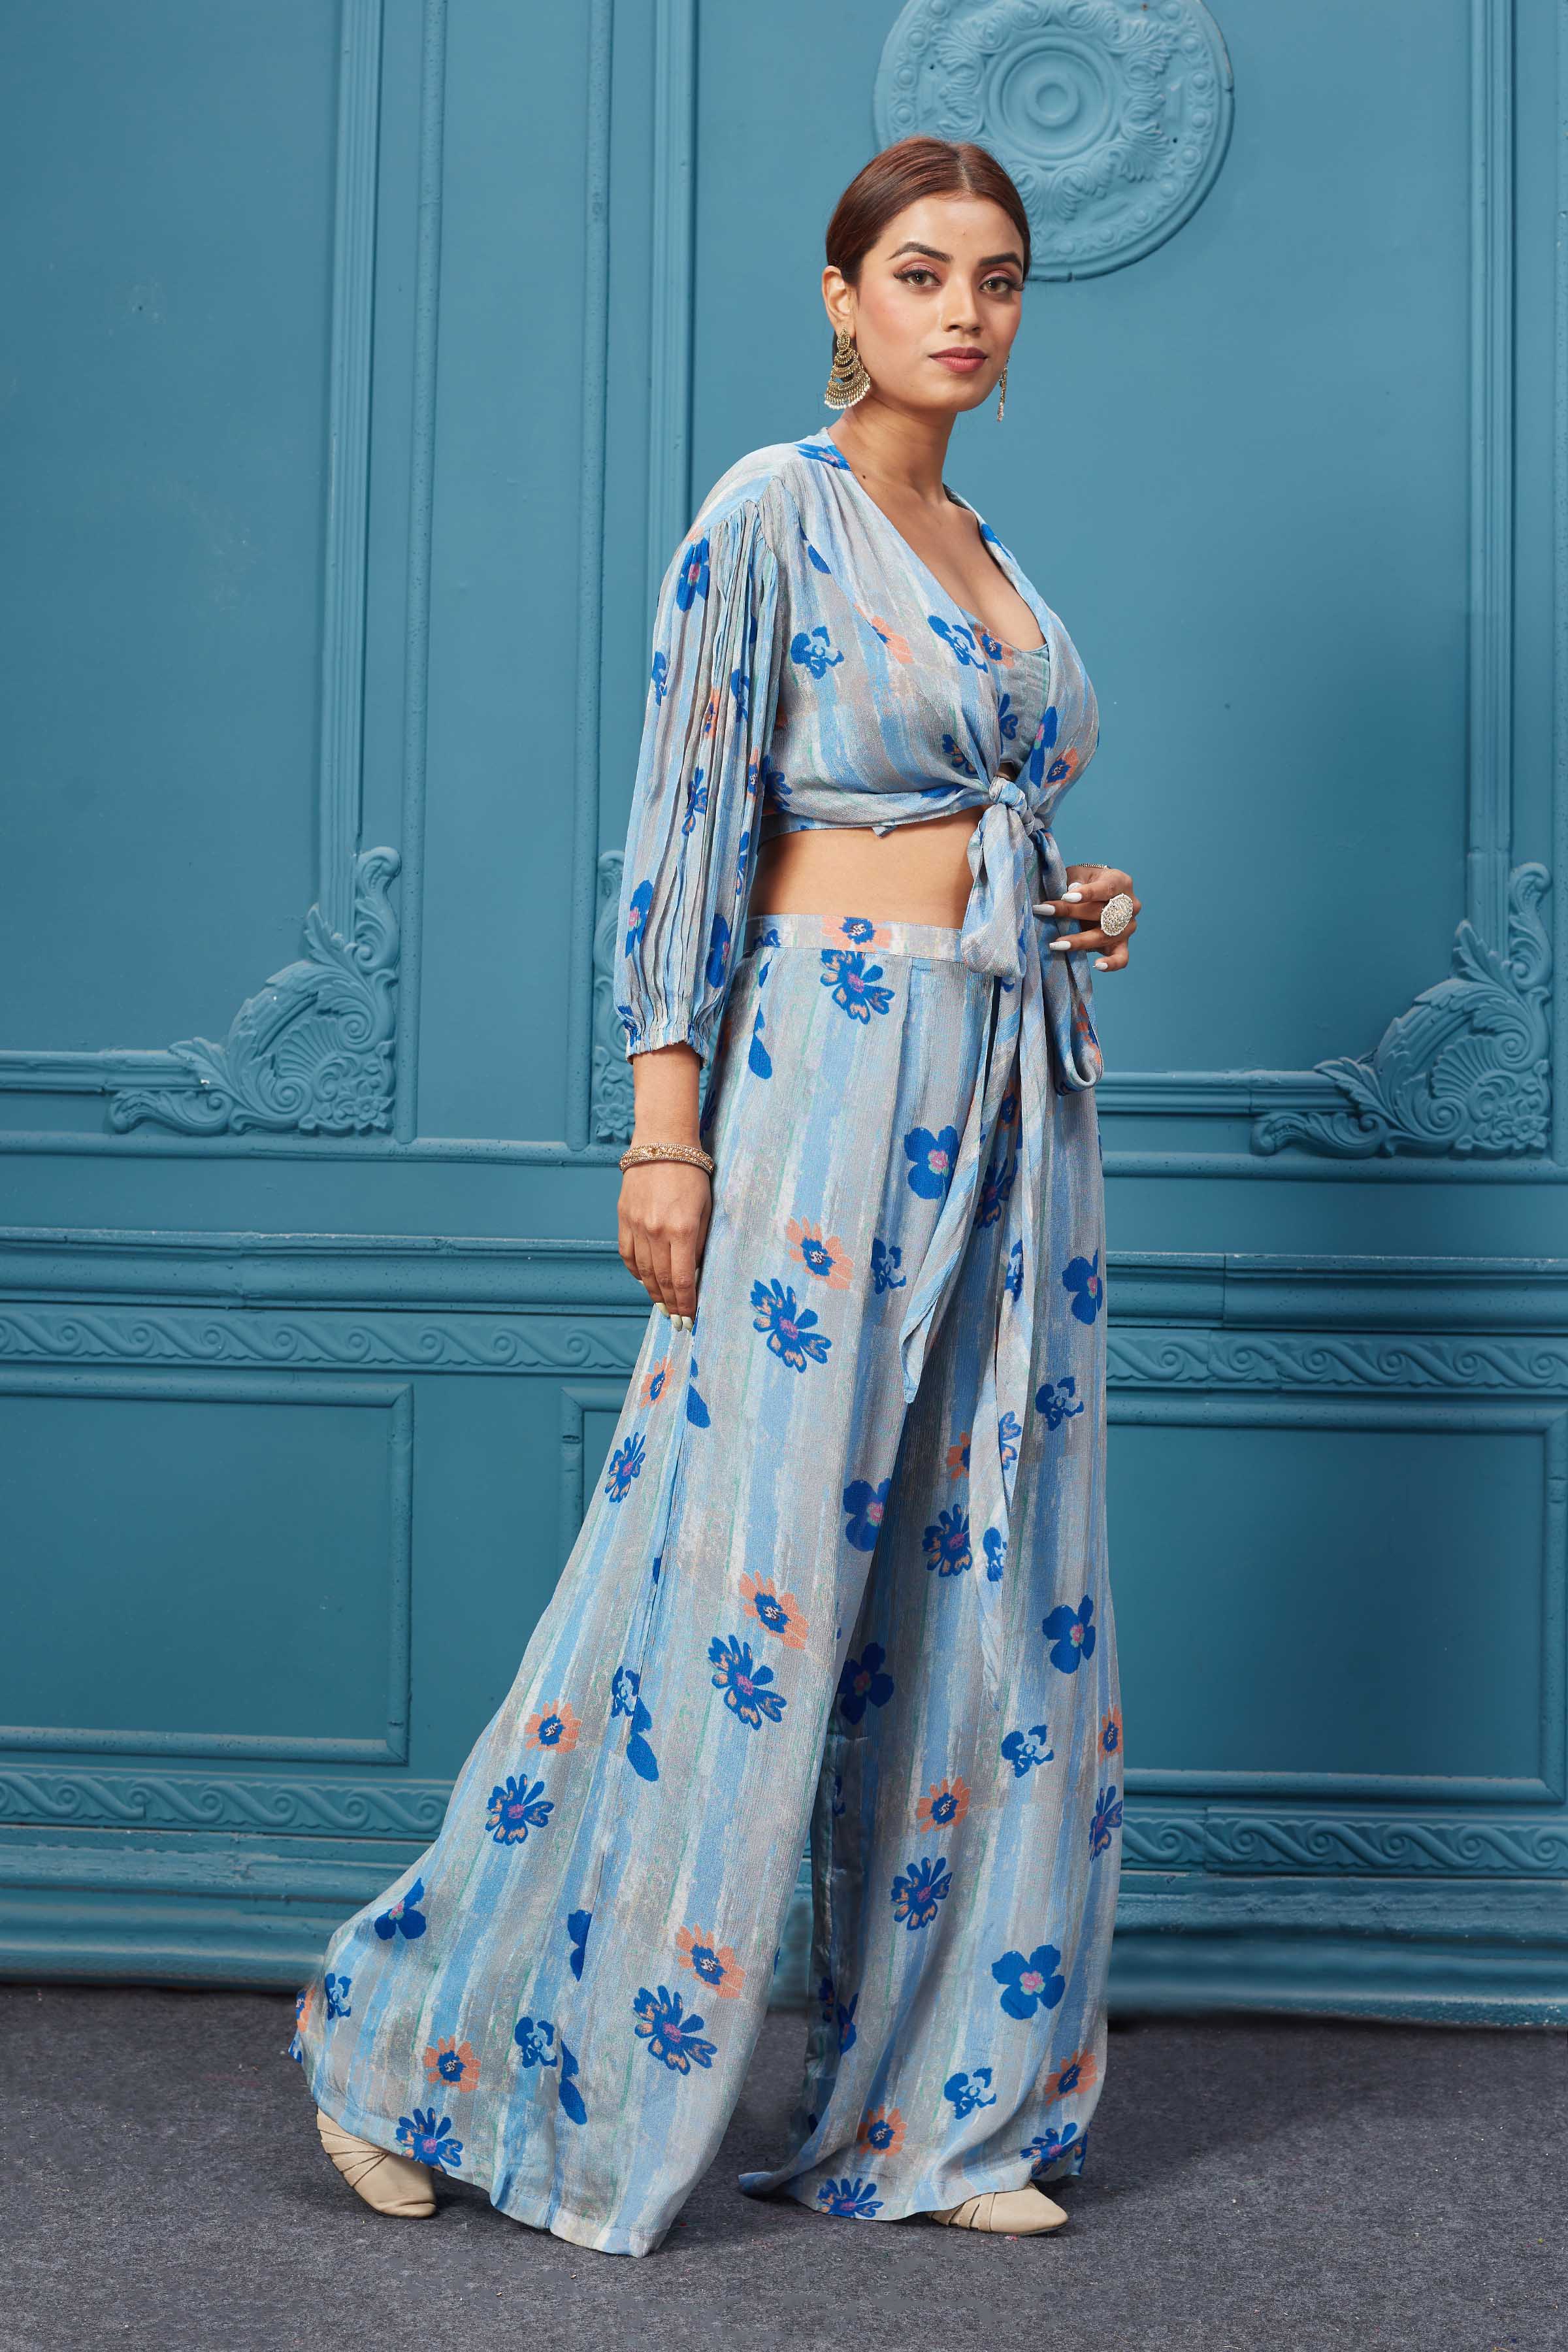 Buy this Gorgeous sky blue suit set with floral embroidery all over. Featuring a beautiful three-piece suit set. Shop Indian wear online at Pure Elegance or visit our store in the USA.